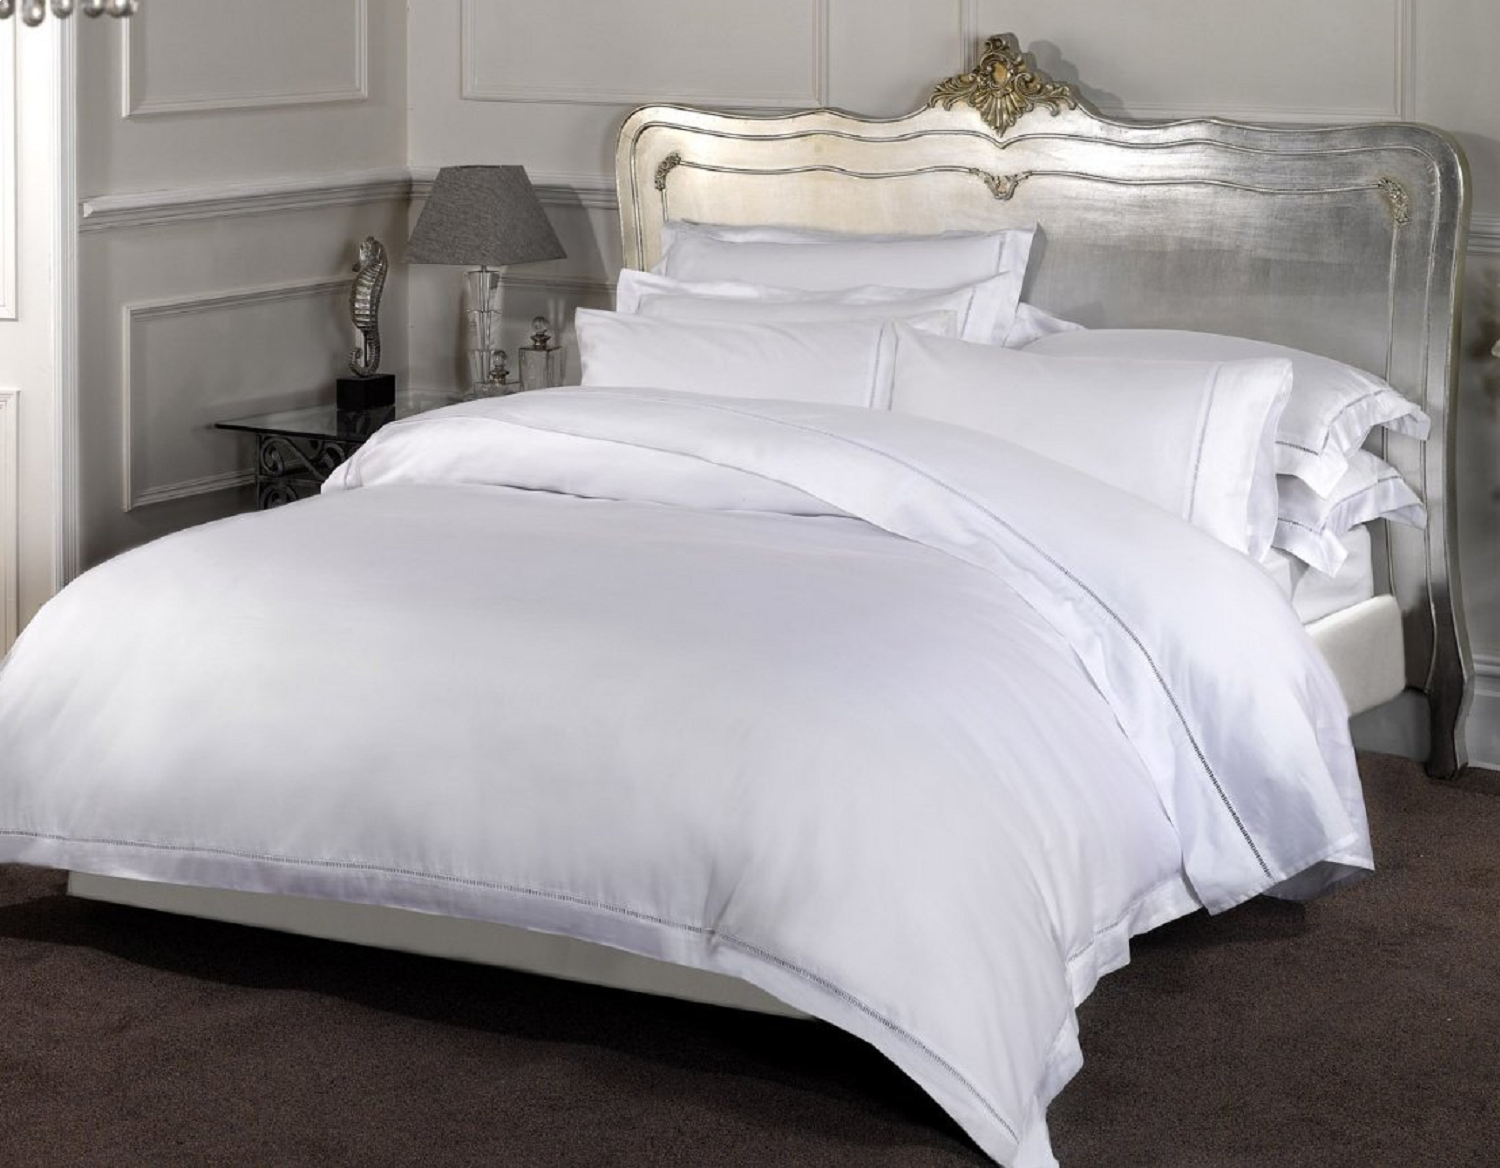 How to keep Fitted Sheets on Bed - Guide